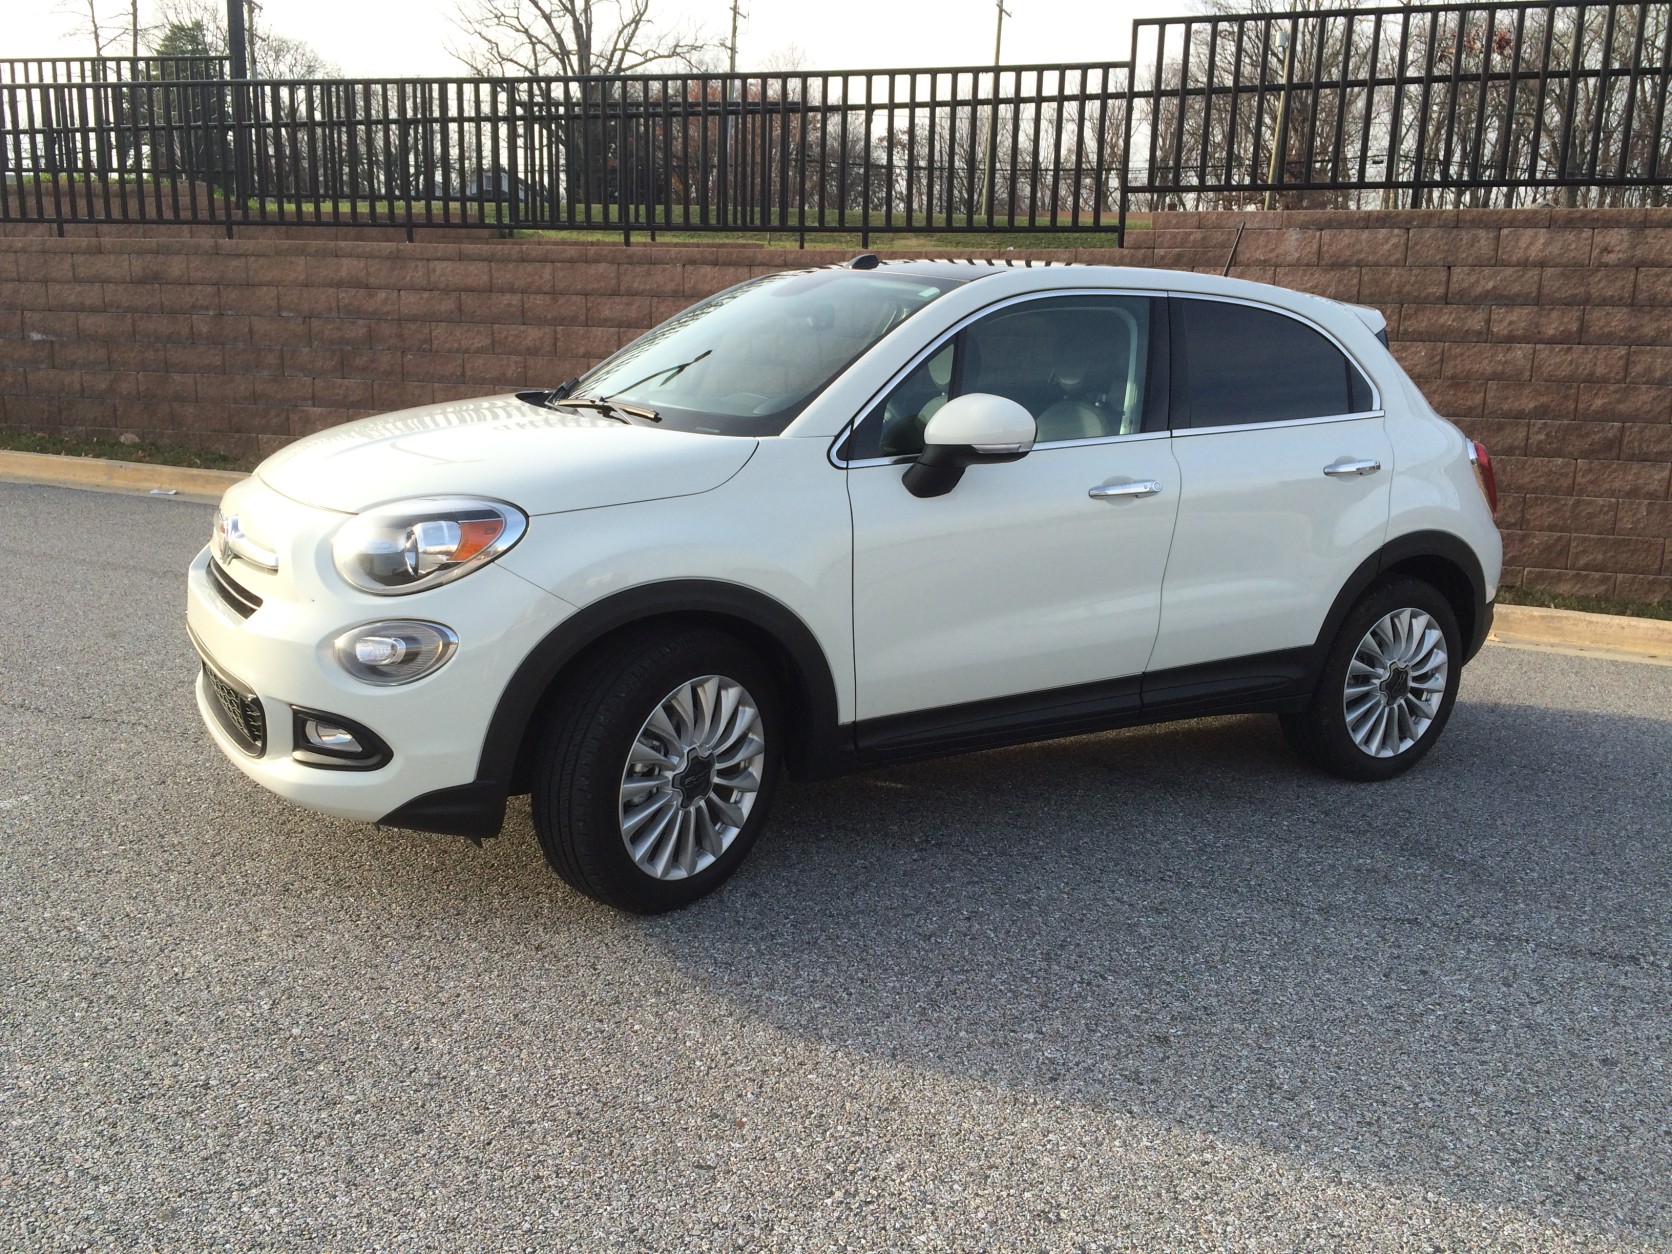 The Fiat 500X is a fashionable car and stylish ride. This compact crossover shares a lot with the Jeep Renegade and both are built together in Italy. Although it doesn't look like the Jeep, you can still tell it’s a Fiat. (WTOP/Mike Parris)